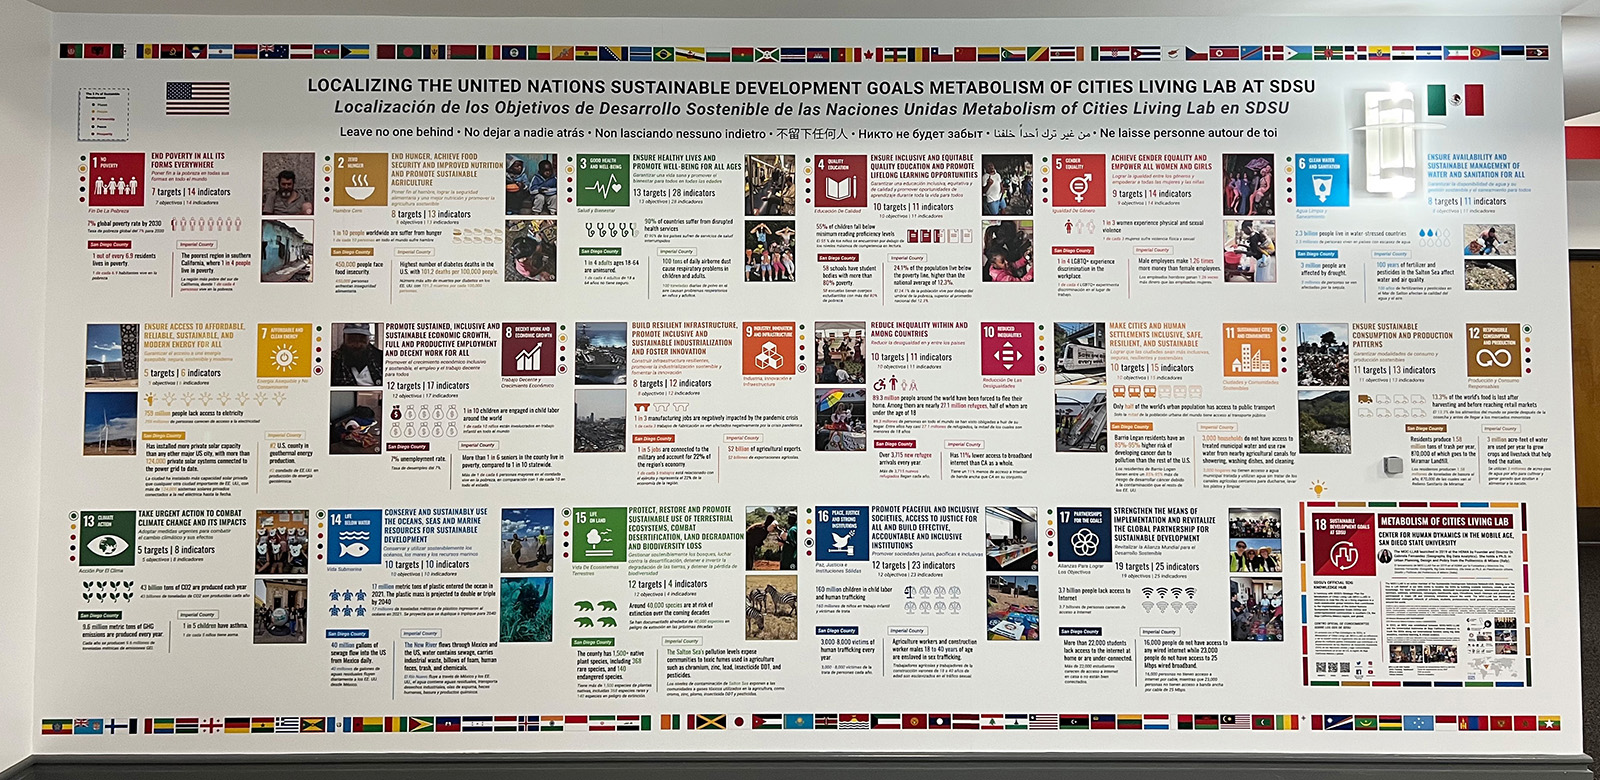 SDSU Library Donor Hall, Metabolism of Cities Living Lab-SDSU 4 SDGs “Leave No One Behind” exhibition, focus on wall with 'Localizing the UN Sustainable Development Goals, the Metabolism of Cities Living Lab at SDSU' display